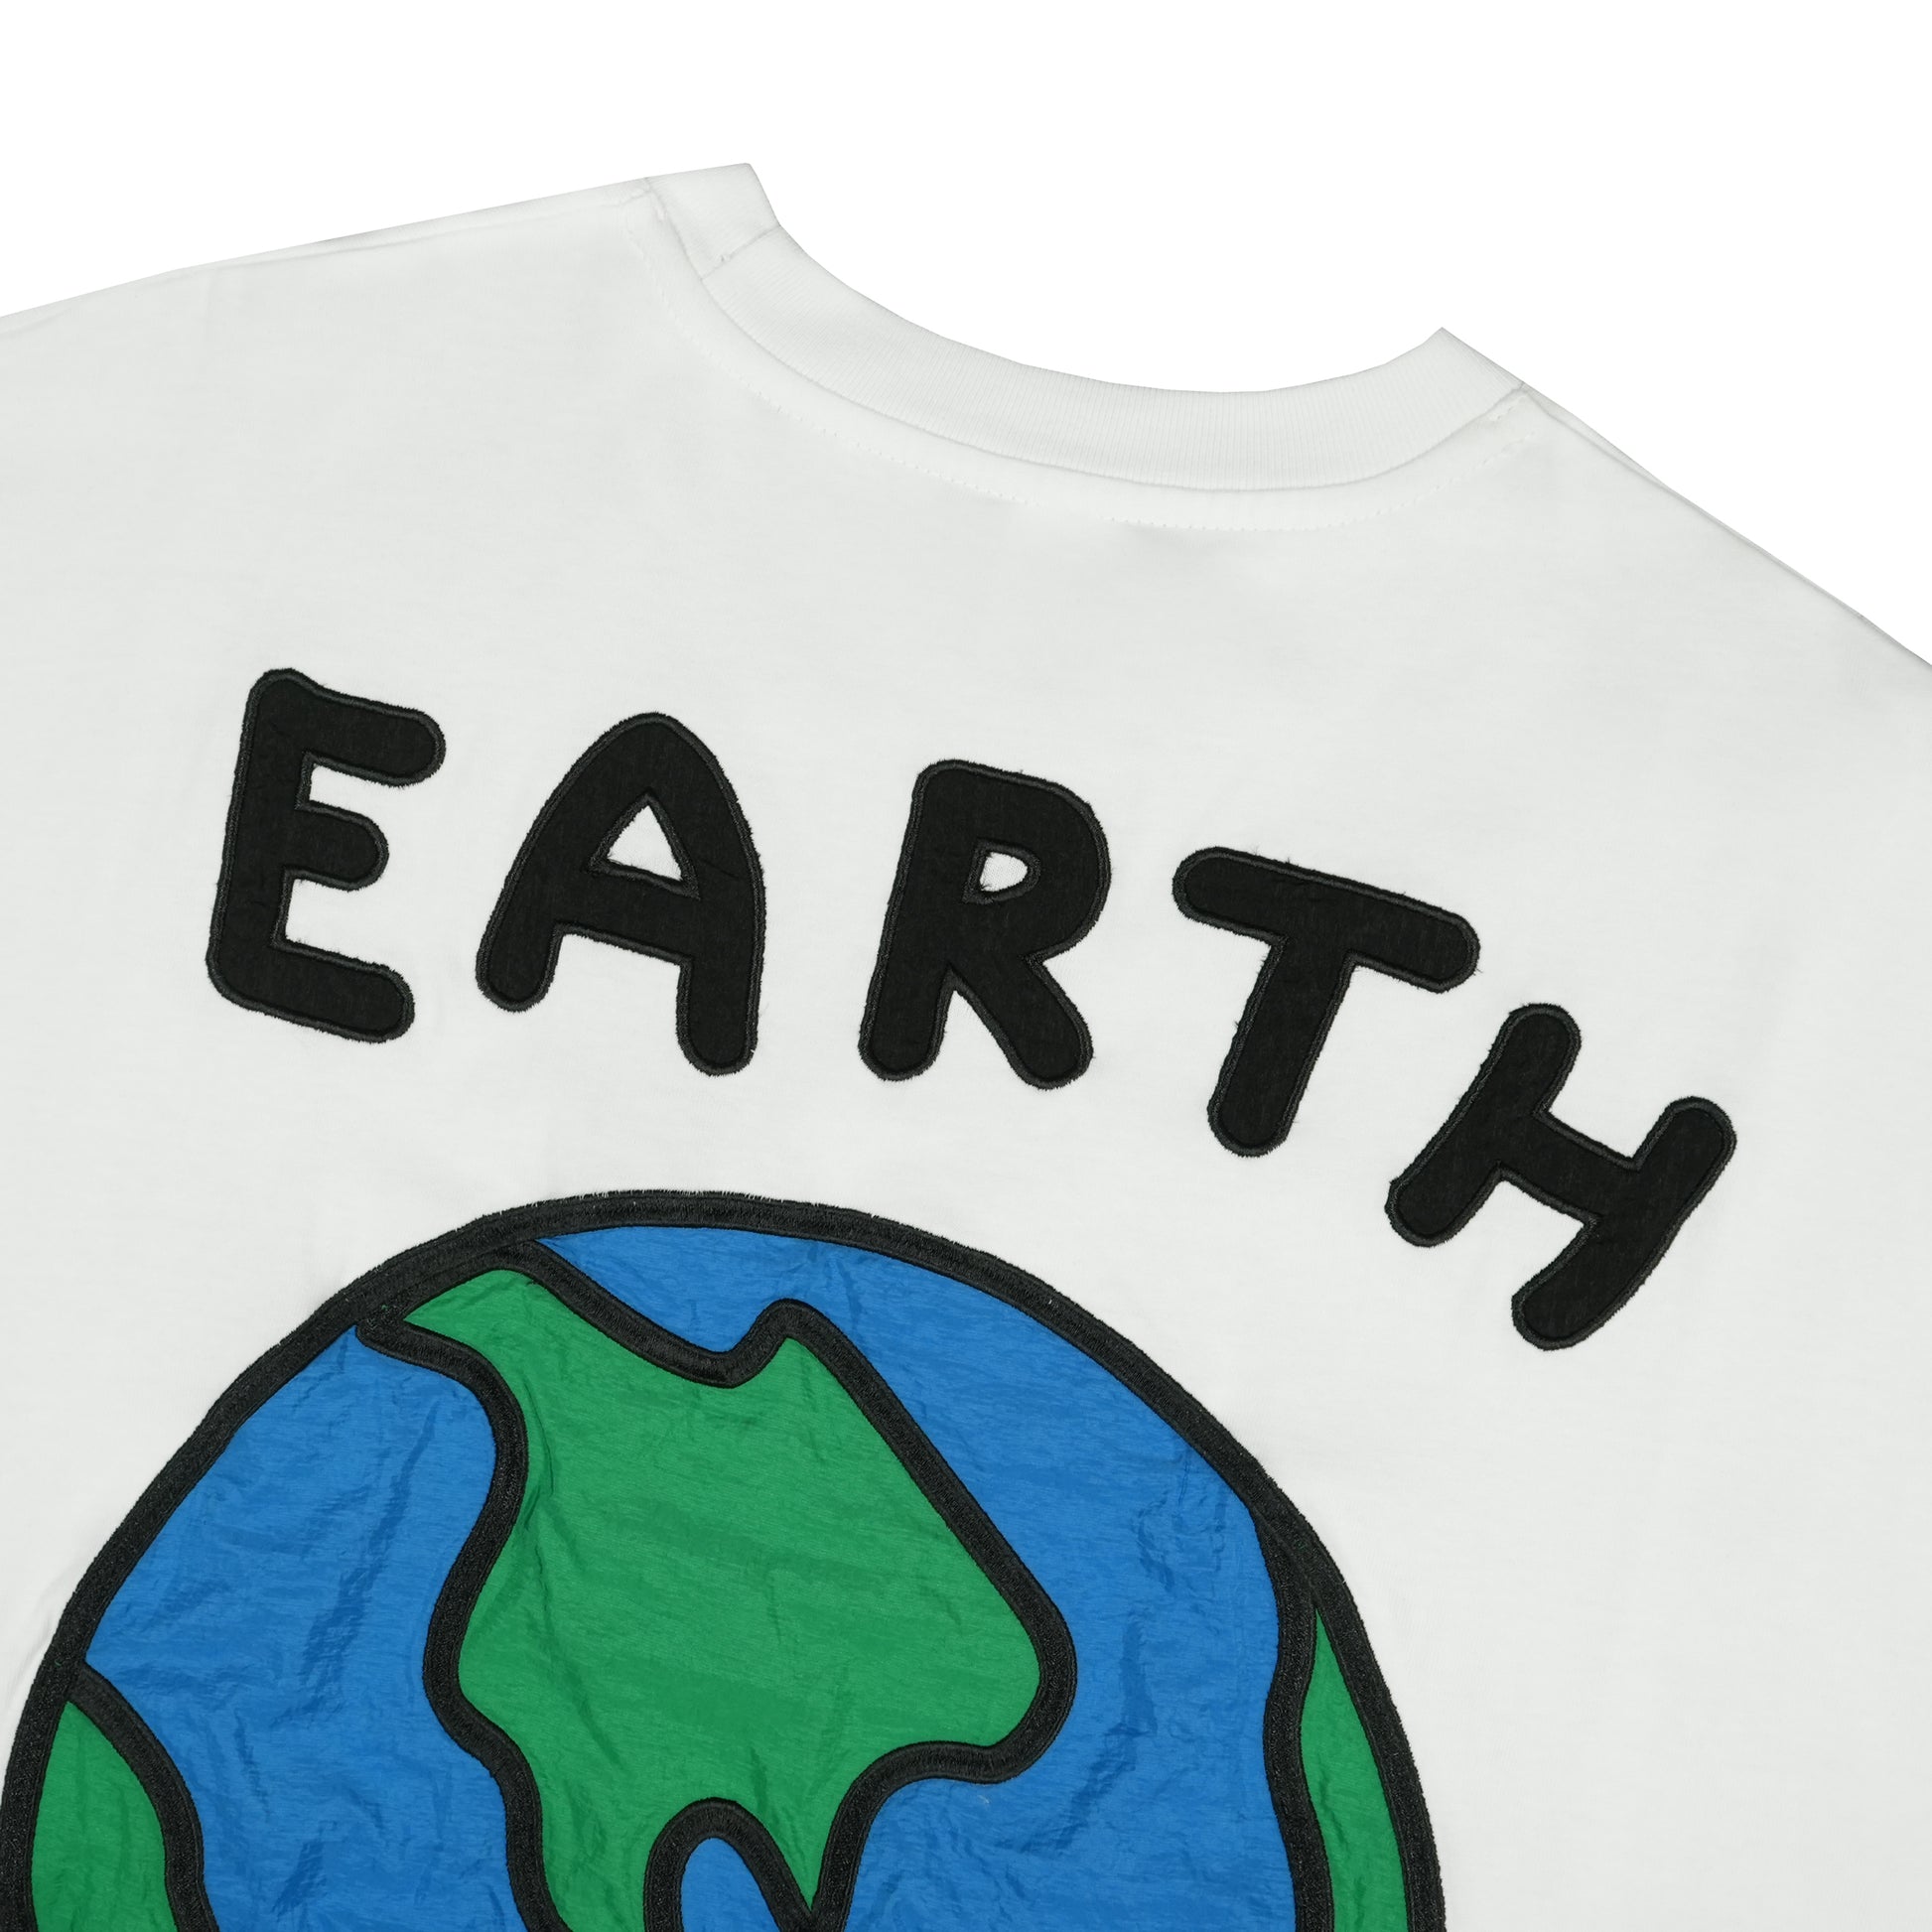 Toson, "Earth" Patchwork T-shirt